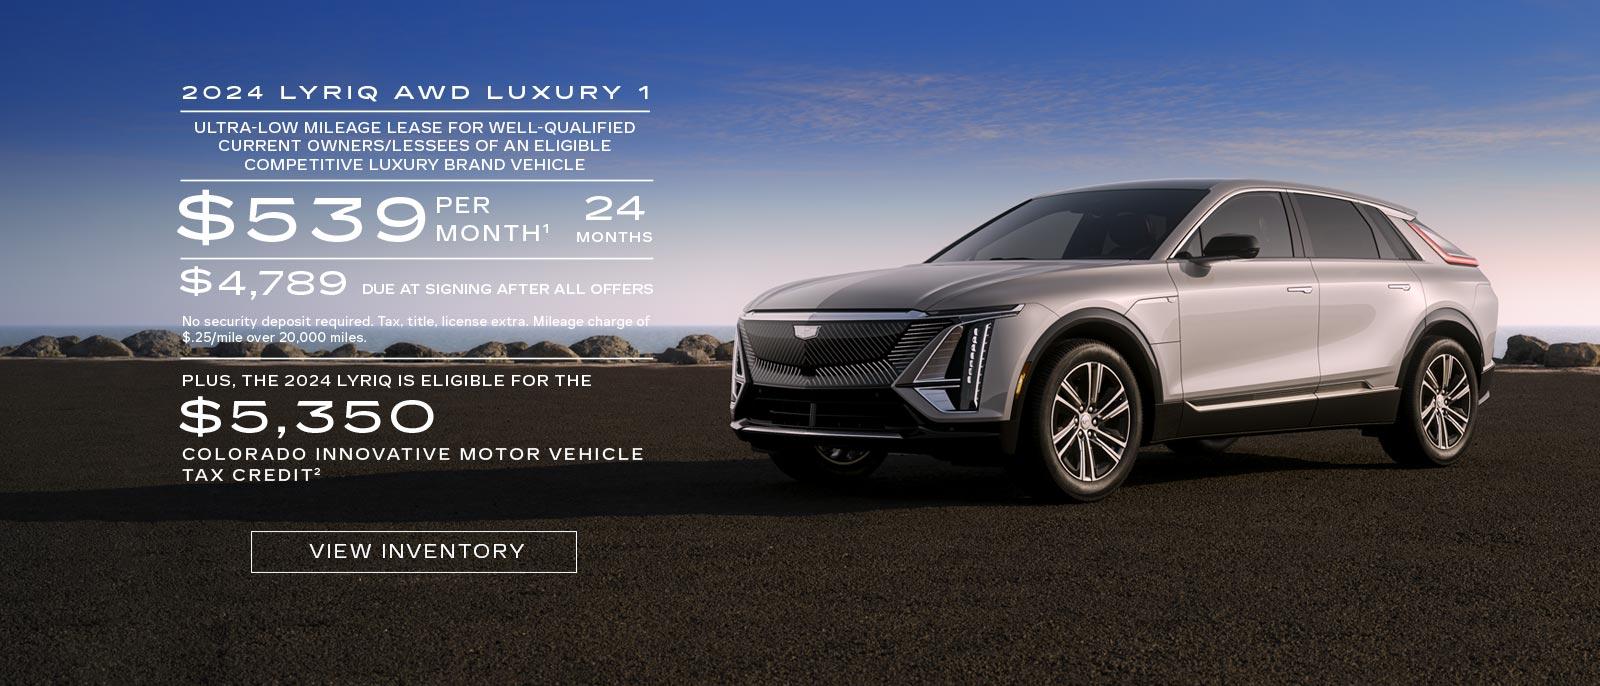 2024 LYRIQ AWD LUXURY 1. Ultra-low Mileage Lease for well-qualified current owners/lessees of an eligible competitive luxury brand vehicle. $539 per month. 24 months. $4,789 due at signing after all offers. Plus, the 2024 LYRIQ is eligible for the $5,350 Colorado Innovative Motor Vehicle Tax credit.